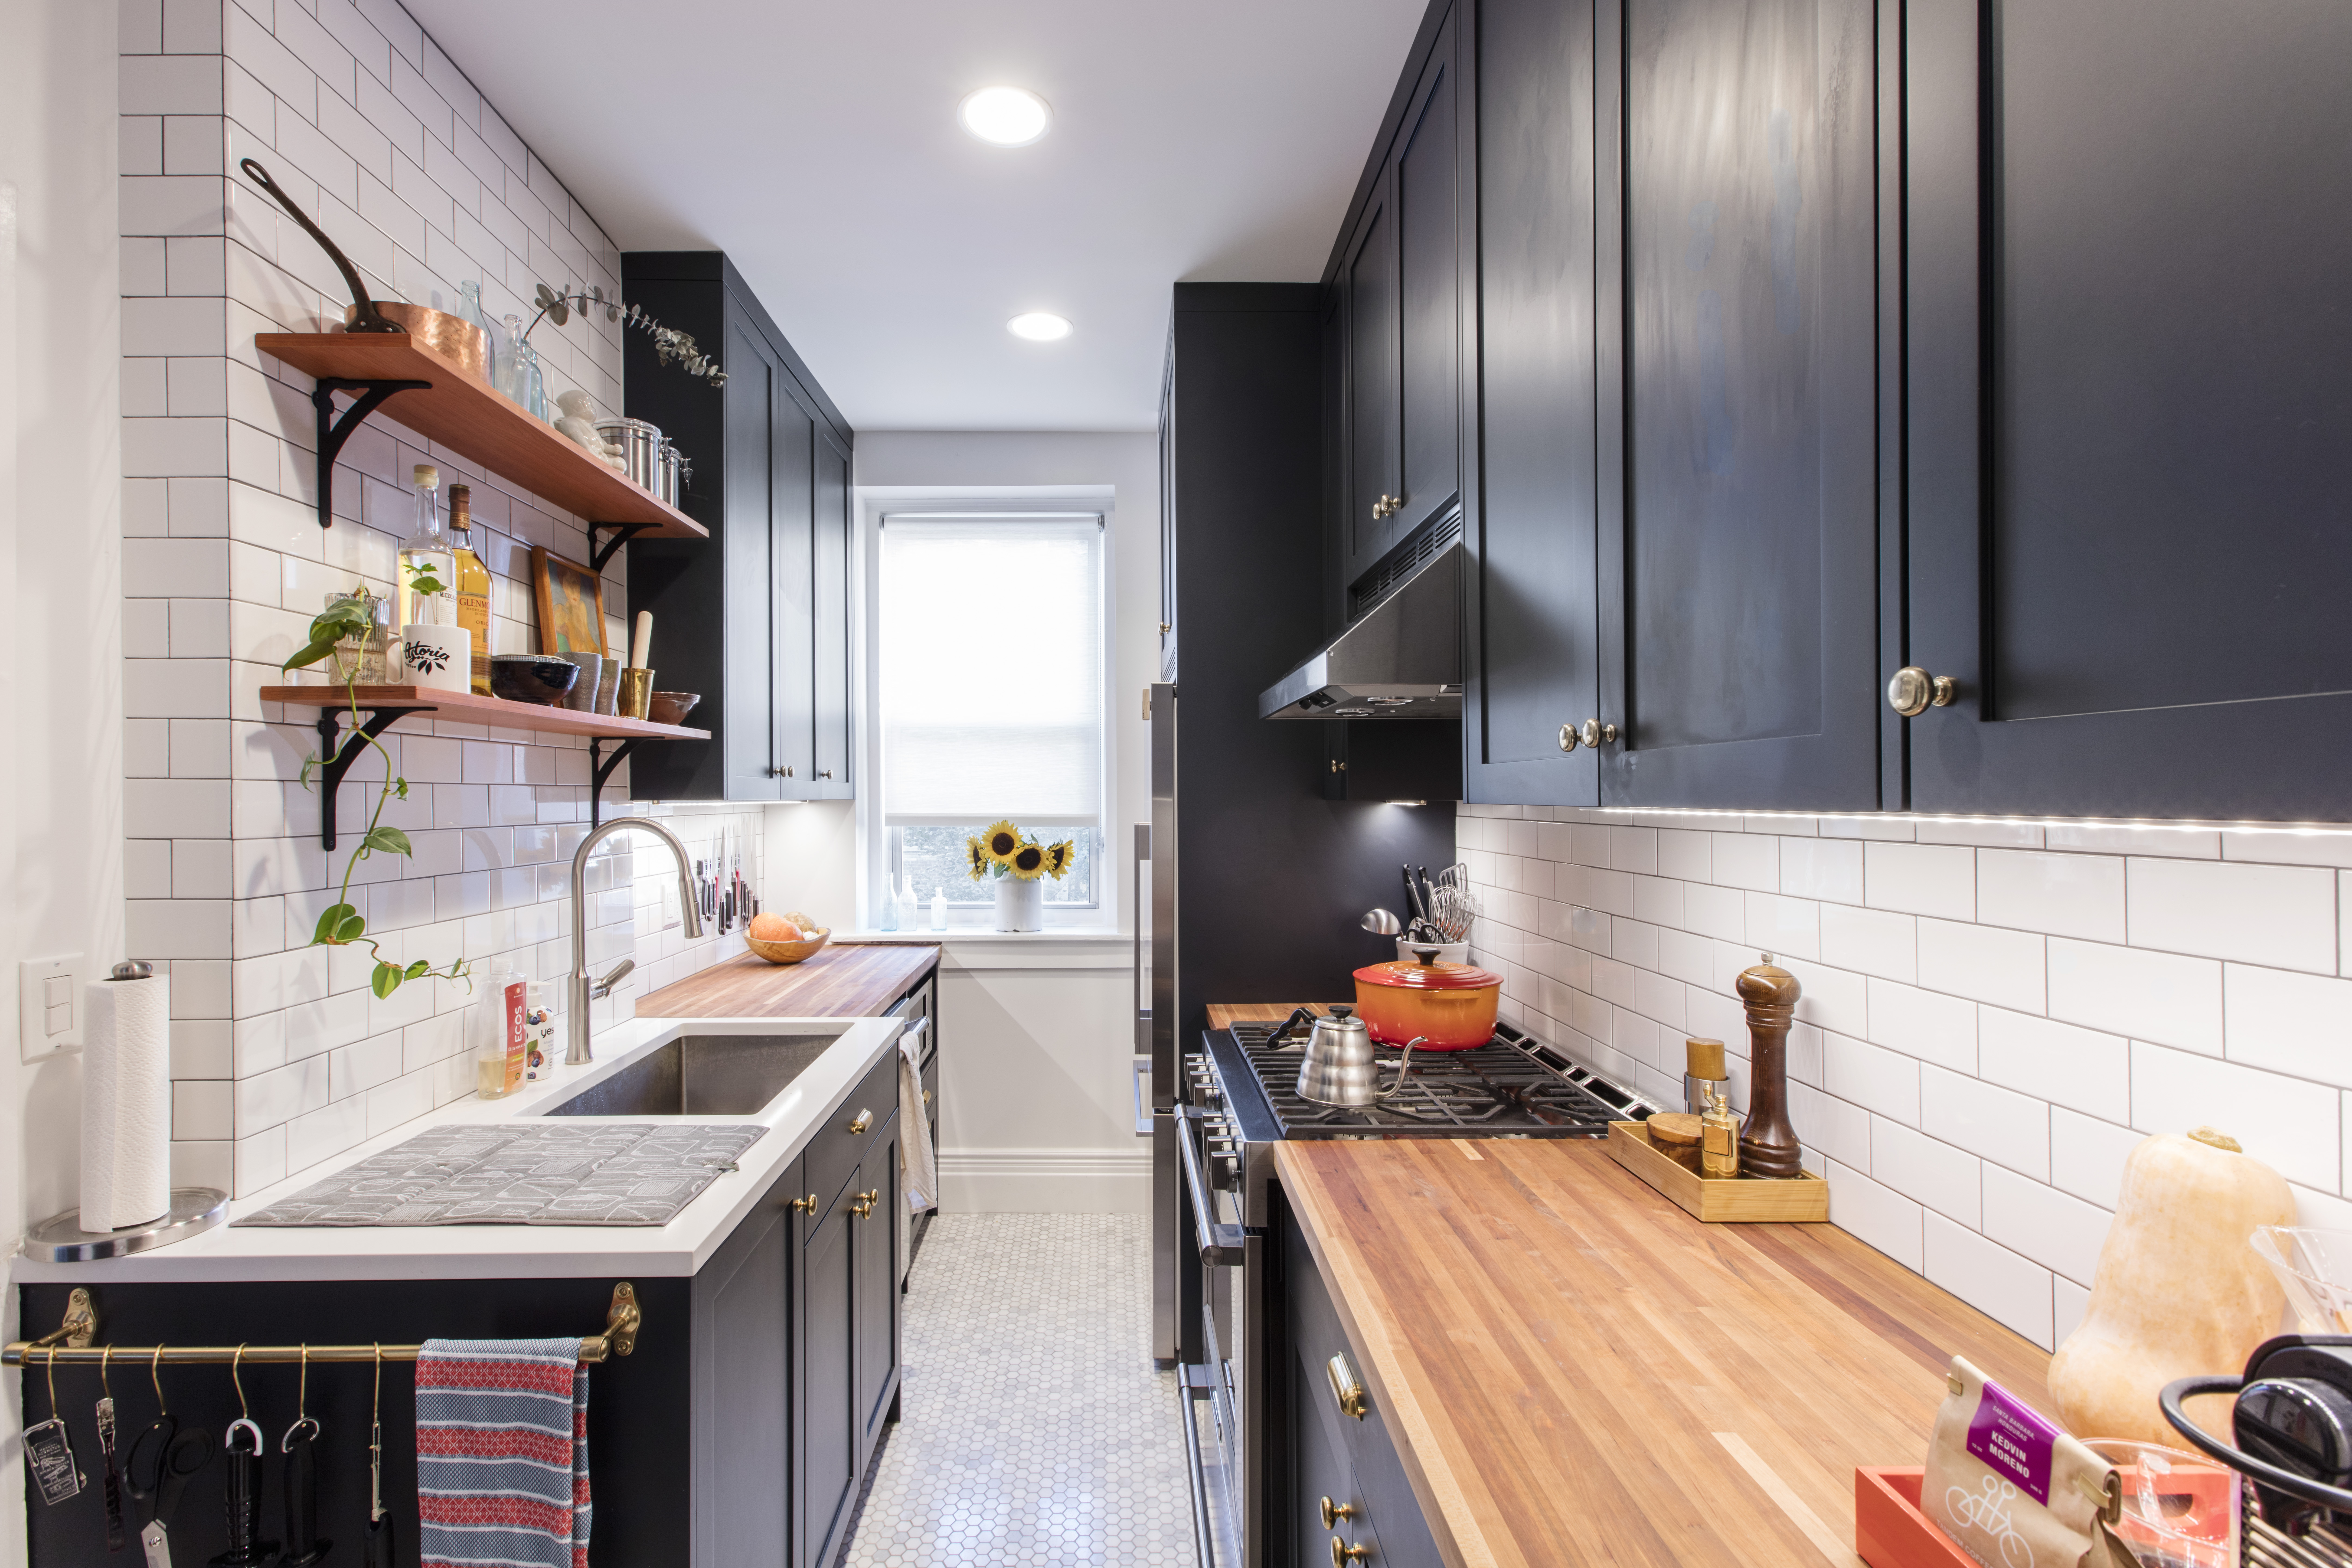 How much does it cost to renovate a kitchen in NYC?